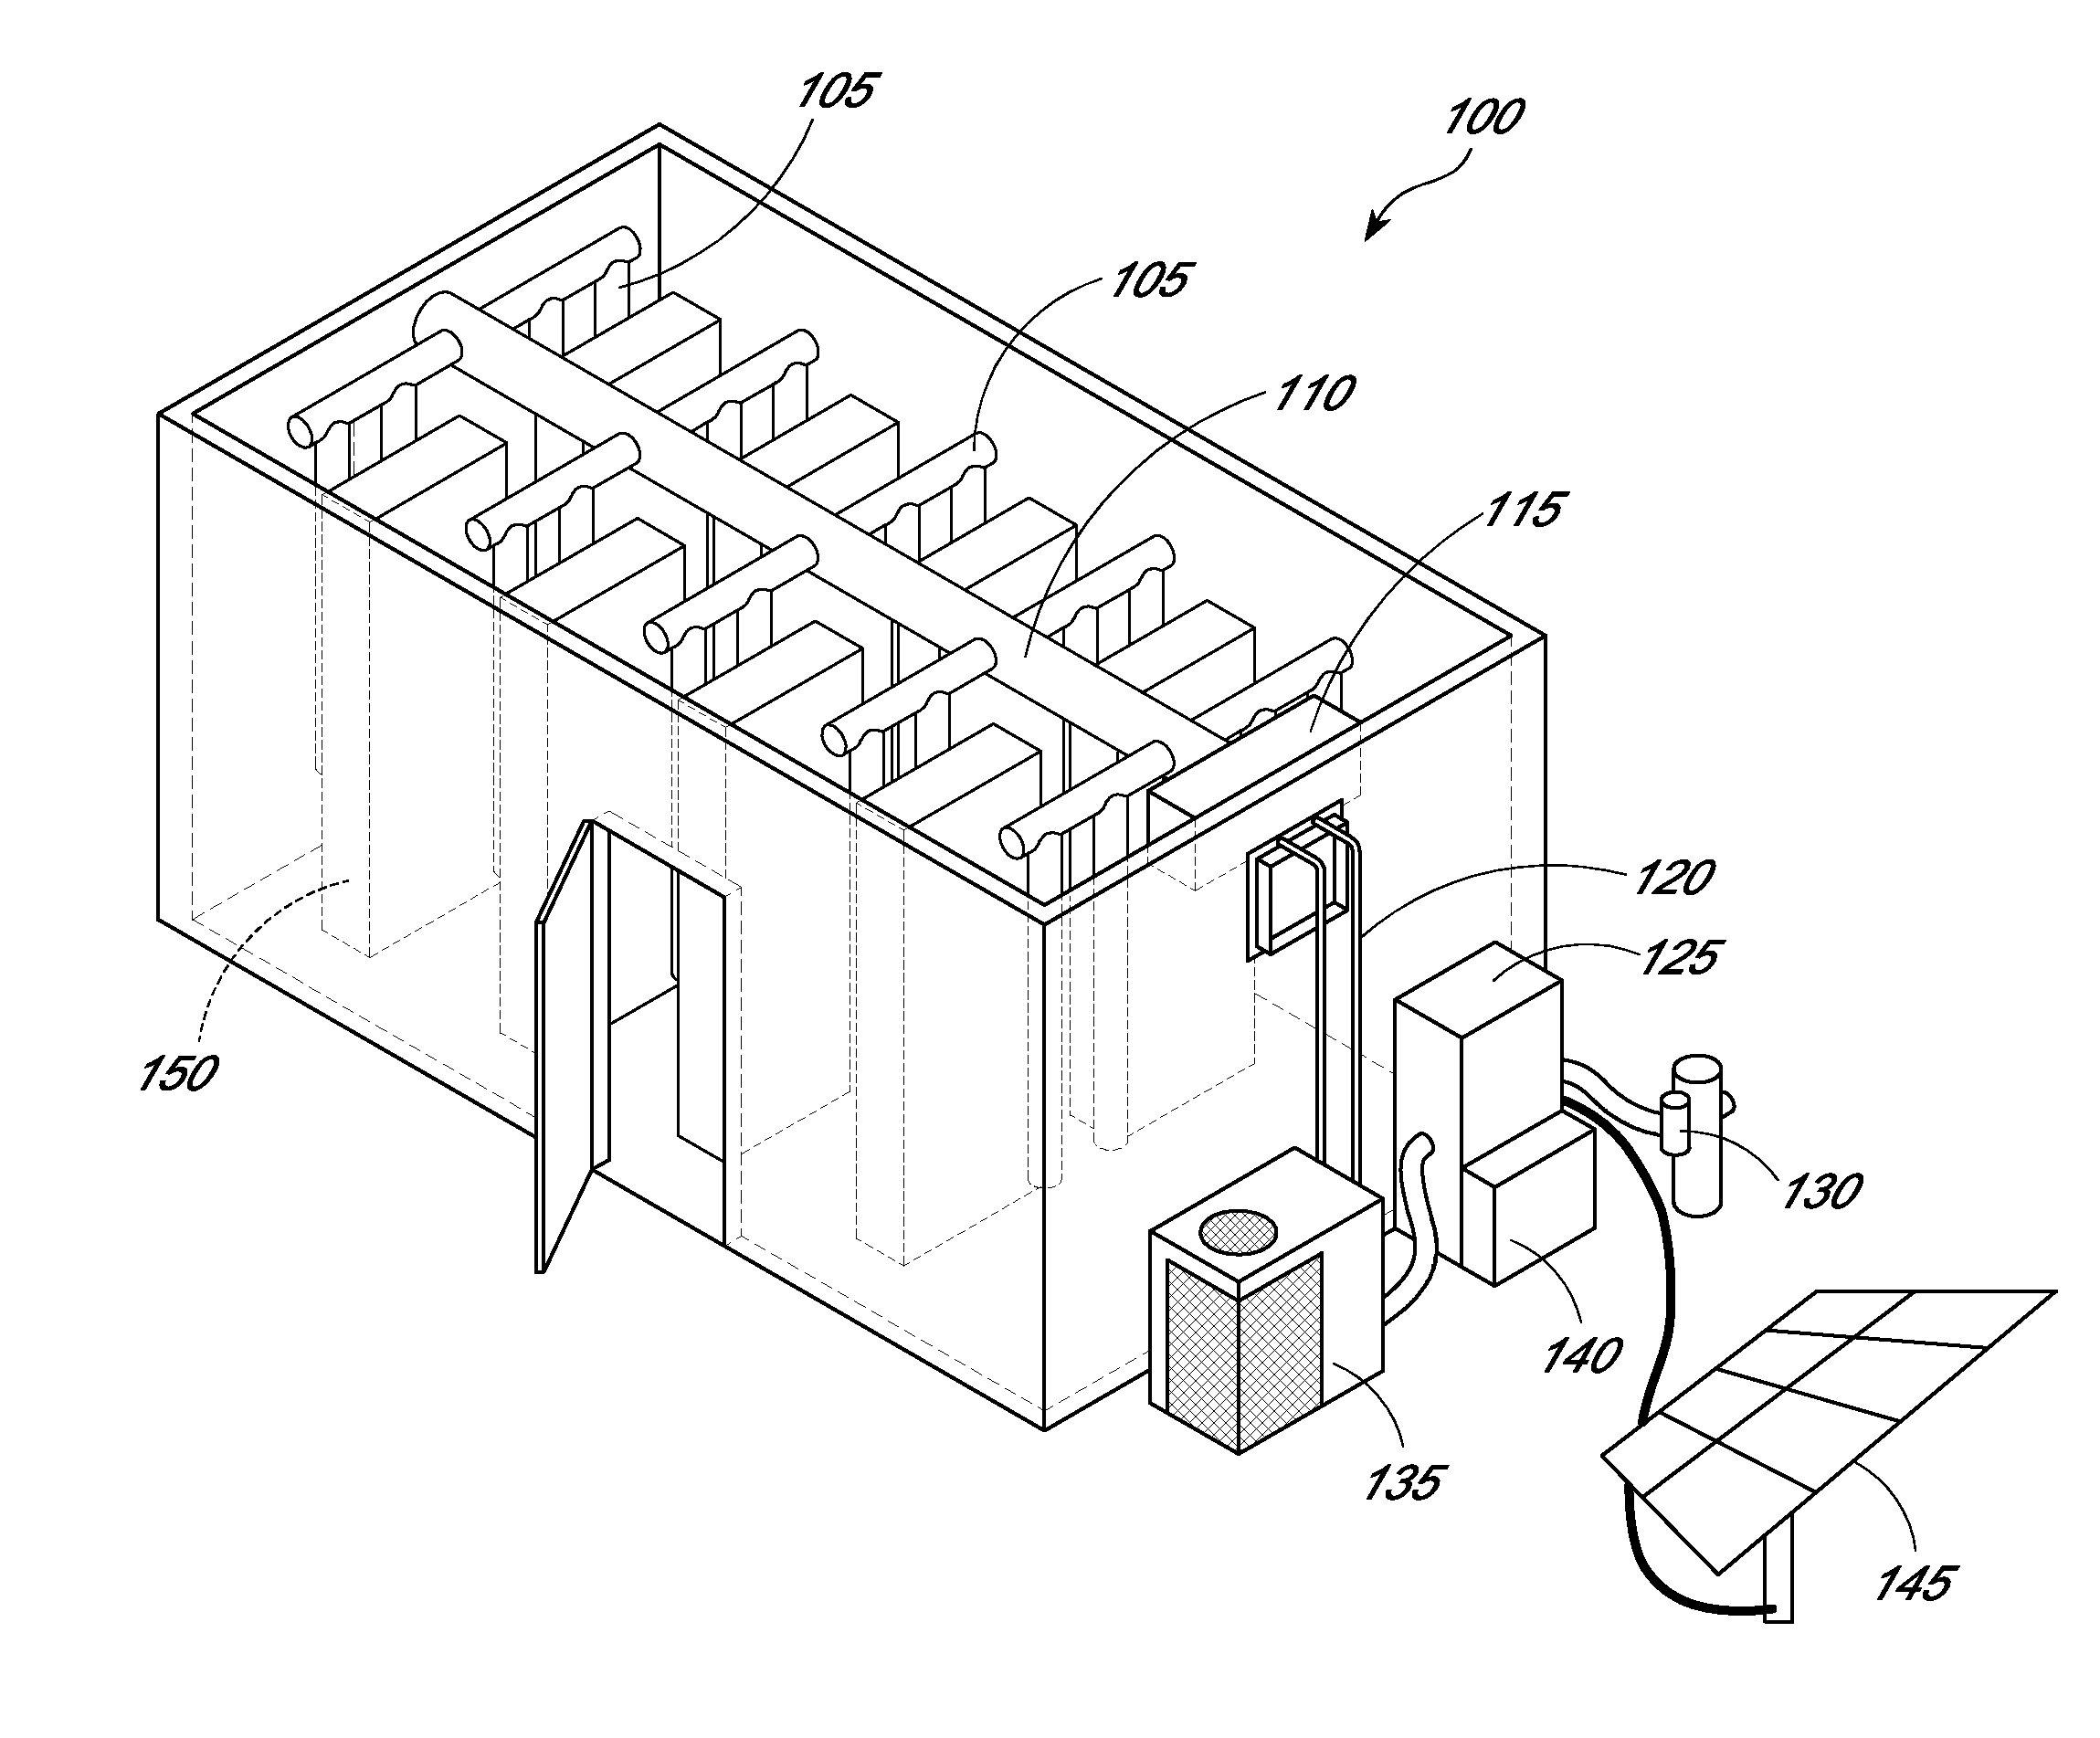 Photovoltaic power source for electromechanical system